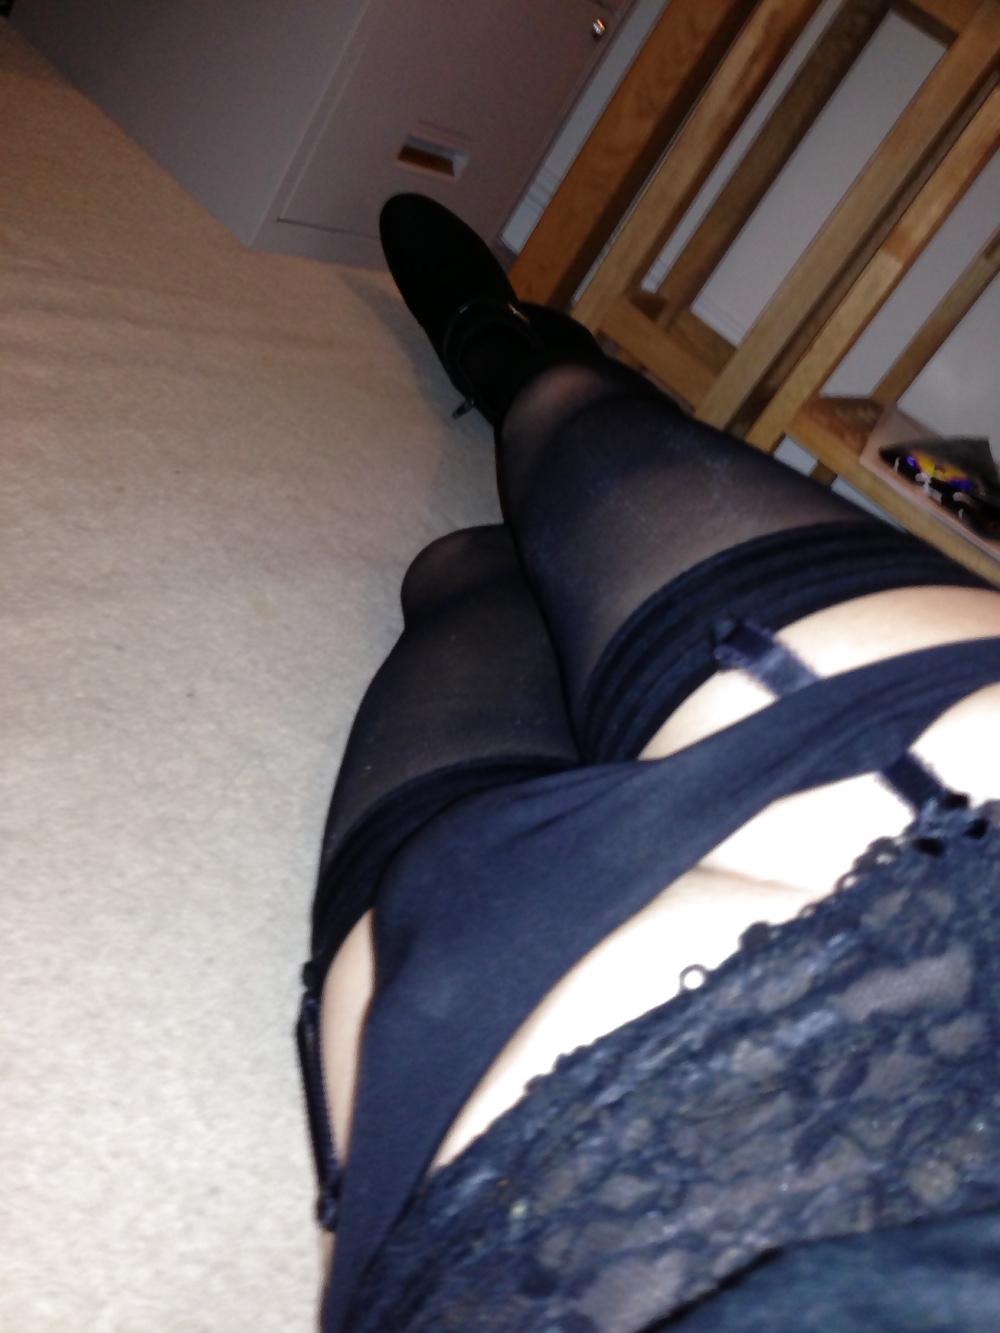 Free new little black dress and stockings photos